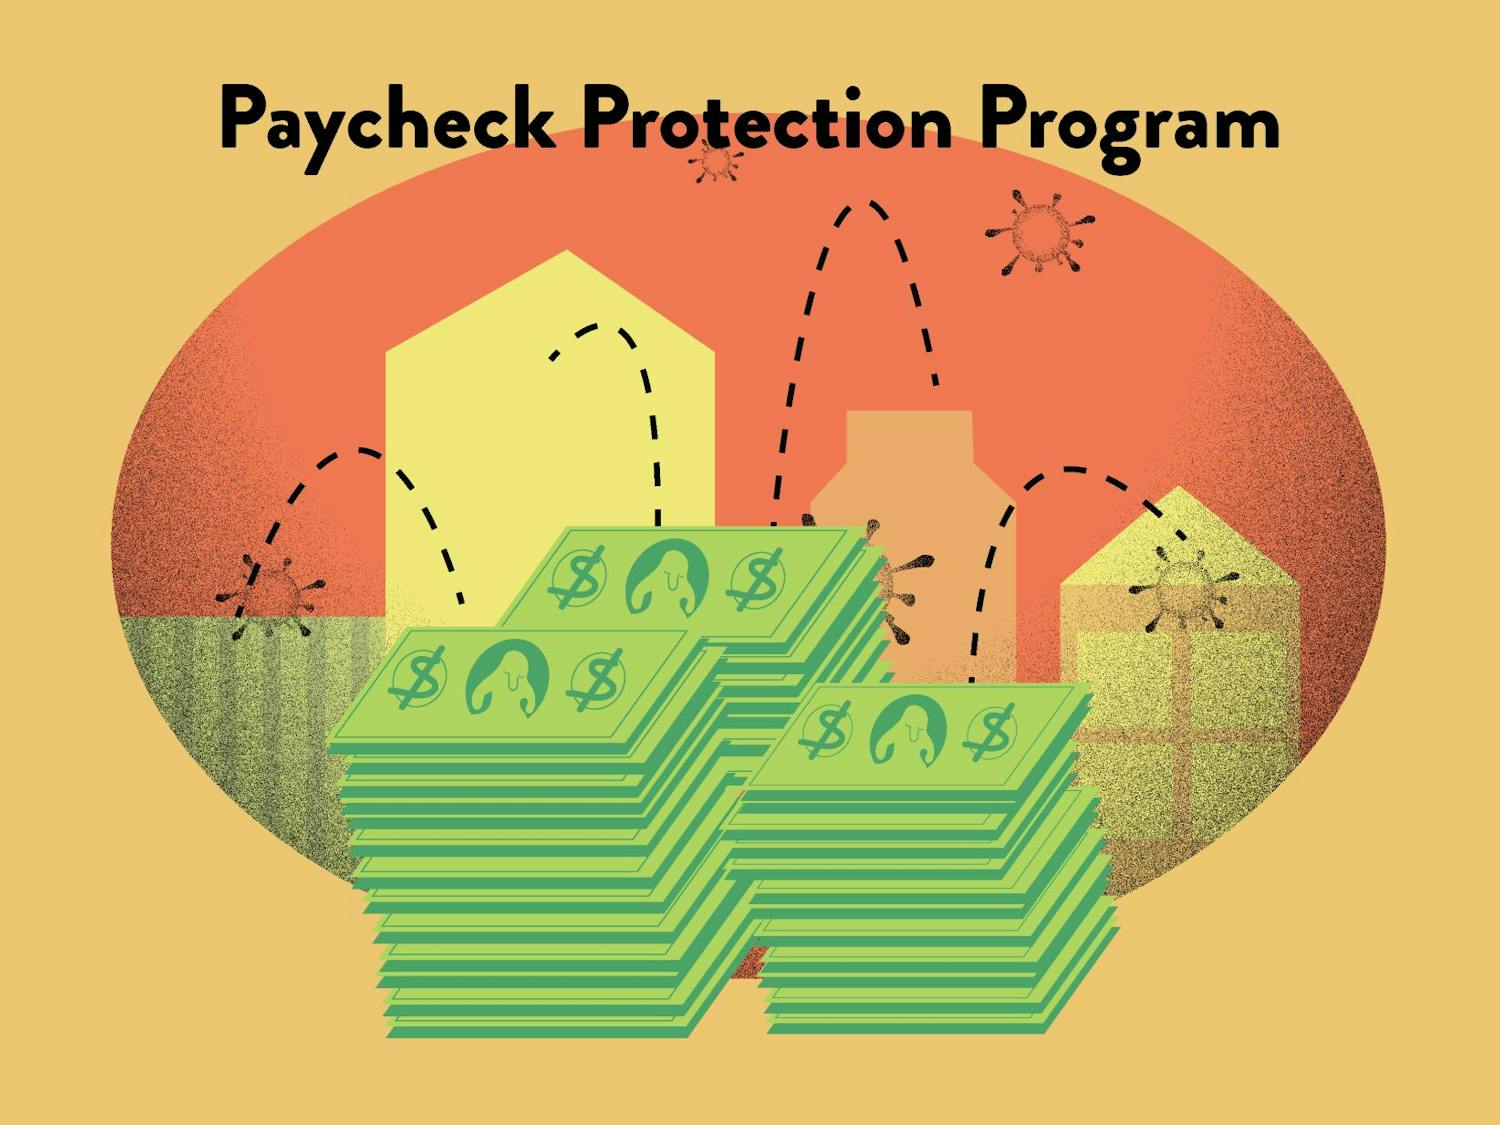 The Paycheck Protection Program under the CARES Act provides loans to cover payroll costs, interest on mortgages and rent and utilities of businesses that have been affected by COVID-19, according to the U.S. Small Business Administration.
&nbsp;